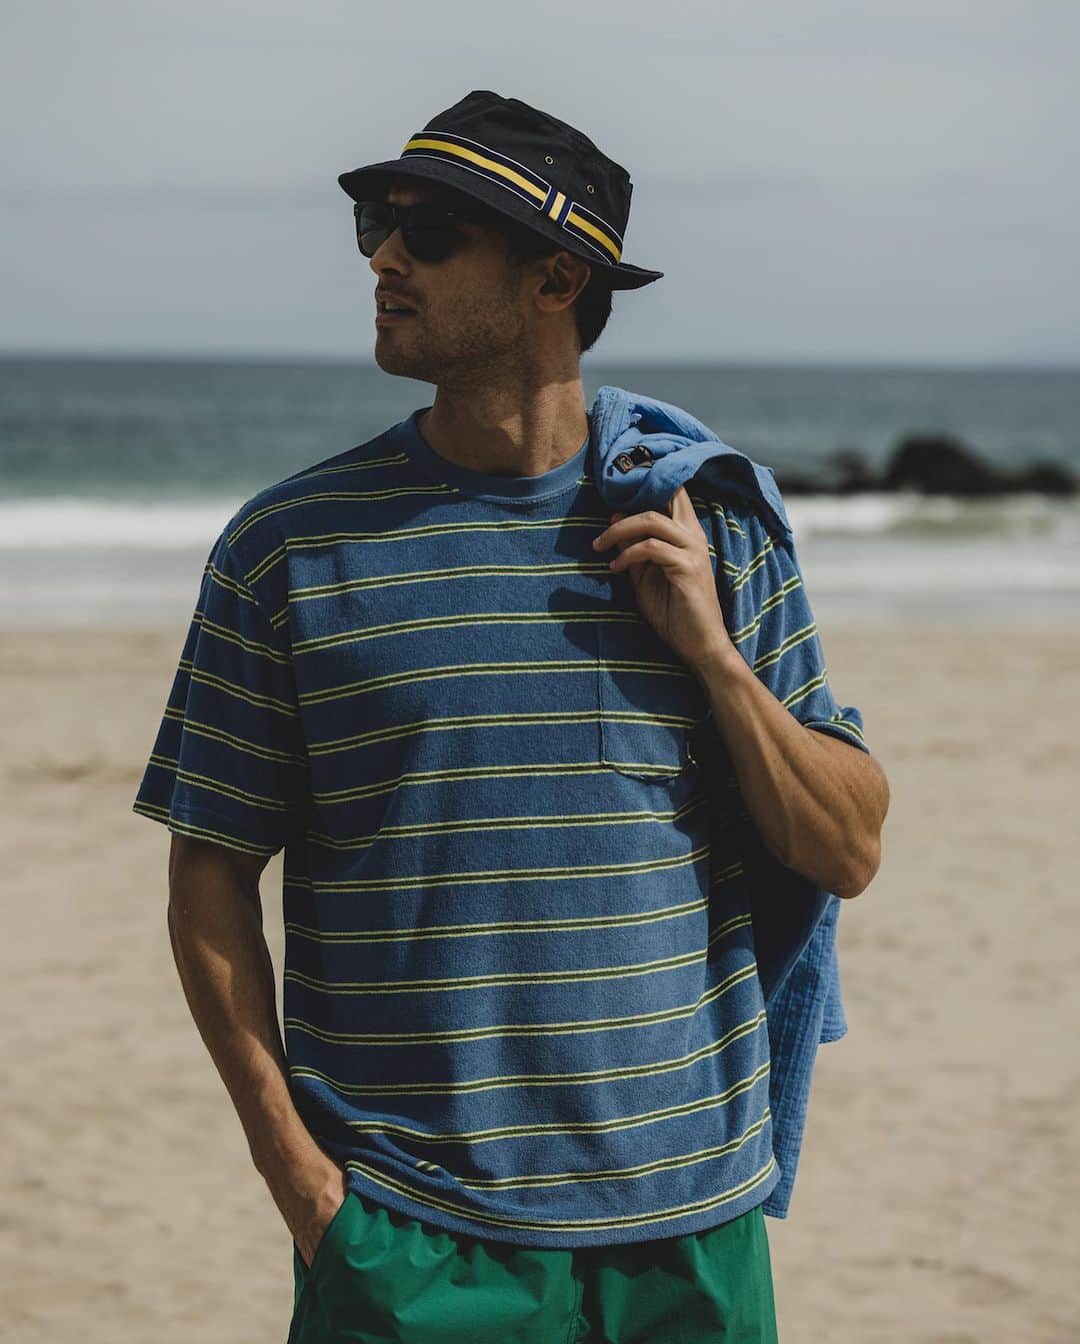 BEAMS+さんのインスタグラム写真 - (BEAMS+Instagram)「... Hope you love the laid-back vibe of BEAMS PLUS classic beachwear! ---------- ●Pocket Tee Pile Stripe A comfy T-shirt with a cool striped design, perfect for the beach. It's made from a mix of cotton and polyester for a soft feel.  ●Pocket Tee Jacquard Stripe This tee draws inspiration from vintage styles and features a unique jacquard stripe pattern created with special yarn.  ●B.D. Double Gauze Enjoy the breezy and soft feel of this gauze material, which has a lovely textured finish.  ●MIL 1 Pleat Athletic Shorts These shorts are designed with a touch of vintage charm, made from smooth nylon taffeta, and inspired by U.S. Navy swim shorts.  快適な着心地と洗練されたスタイル、BEAMS PLUSのクラシックなビーチウェア。 ---------- ● Pocket Tee Pile Stripe 海が似合うパイル素材とストライプ。コットンとポリエステルの混紡生地を使用。パイル地のループ長を短く設定し、パイル特有の重みを軽減。肌触りと着心地を考えたパイルTシャツ。  ● Pocket Tee Jacquard Stripe ビンテージ Tシャツから着想し、オリジナルで編み立てたジャカードストライプ。40番双糸を使い、4色の先染め糸で編みあげています。  ● B.D. Double Gauze 柔らかで通気性に富むガーゼ素材。生地染めを行うことでふっくらとした風合いに仕上げています。   ● MIL 1 Pleat Athletic Shorts 50デニールナイロンタフタを使用。ヴィンテージ感のある微光沢のナイロンは、もちろんオリジナルファブリック。 U.S.NAVYのスイムショーツをベースにデザインしたモデルです。 . @beams_plus @beams_plus_harajuku @beams_plus_yurakucho #beamsplus」8月8日 20時03分 - beams_plus_harajuku